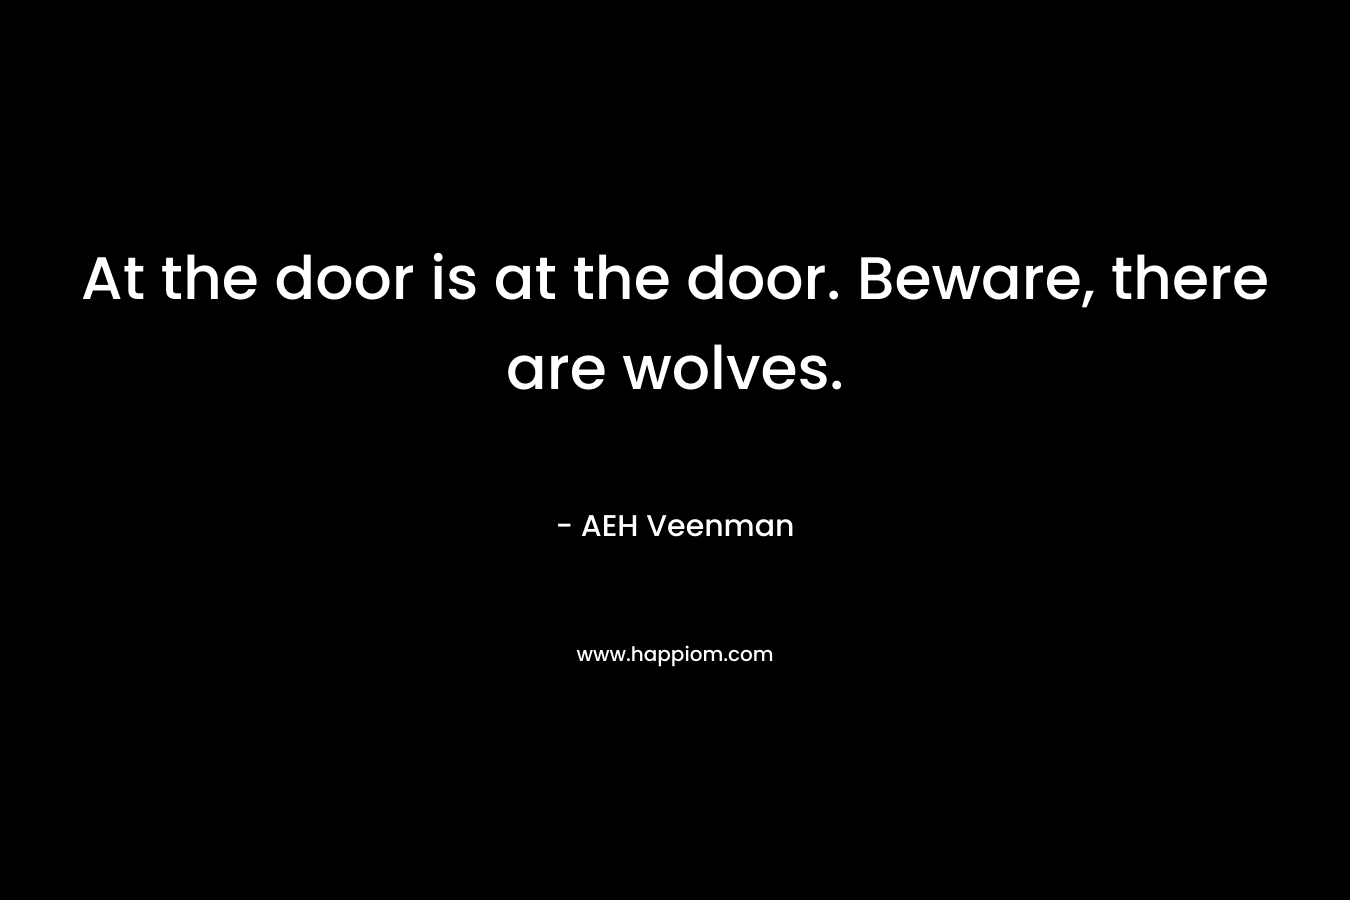 At the door is at the door. Beware, there are wolves.